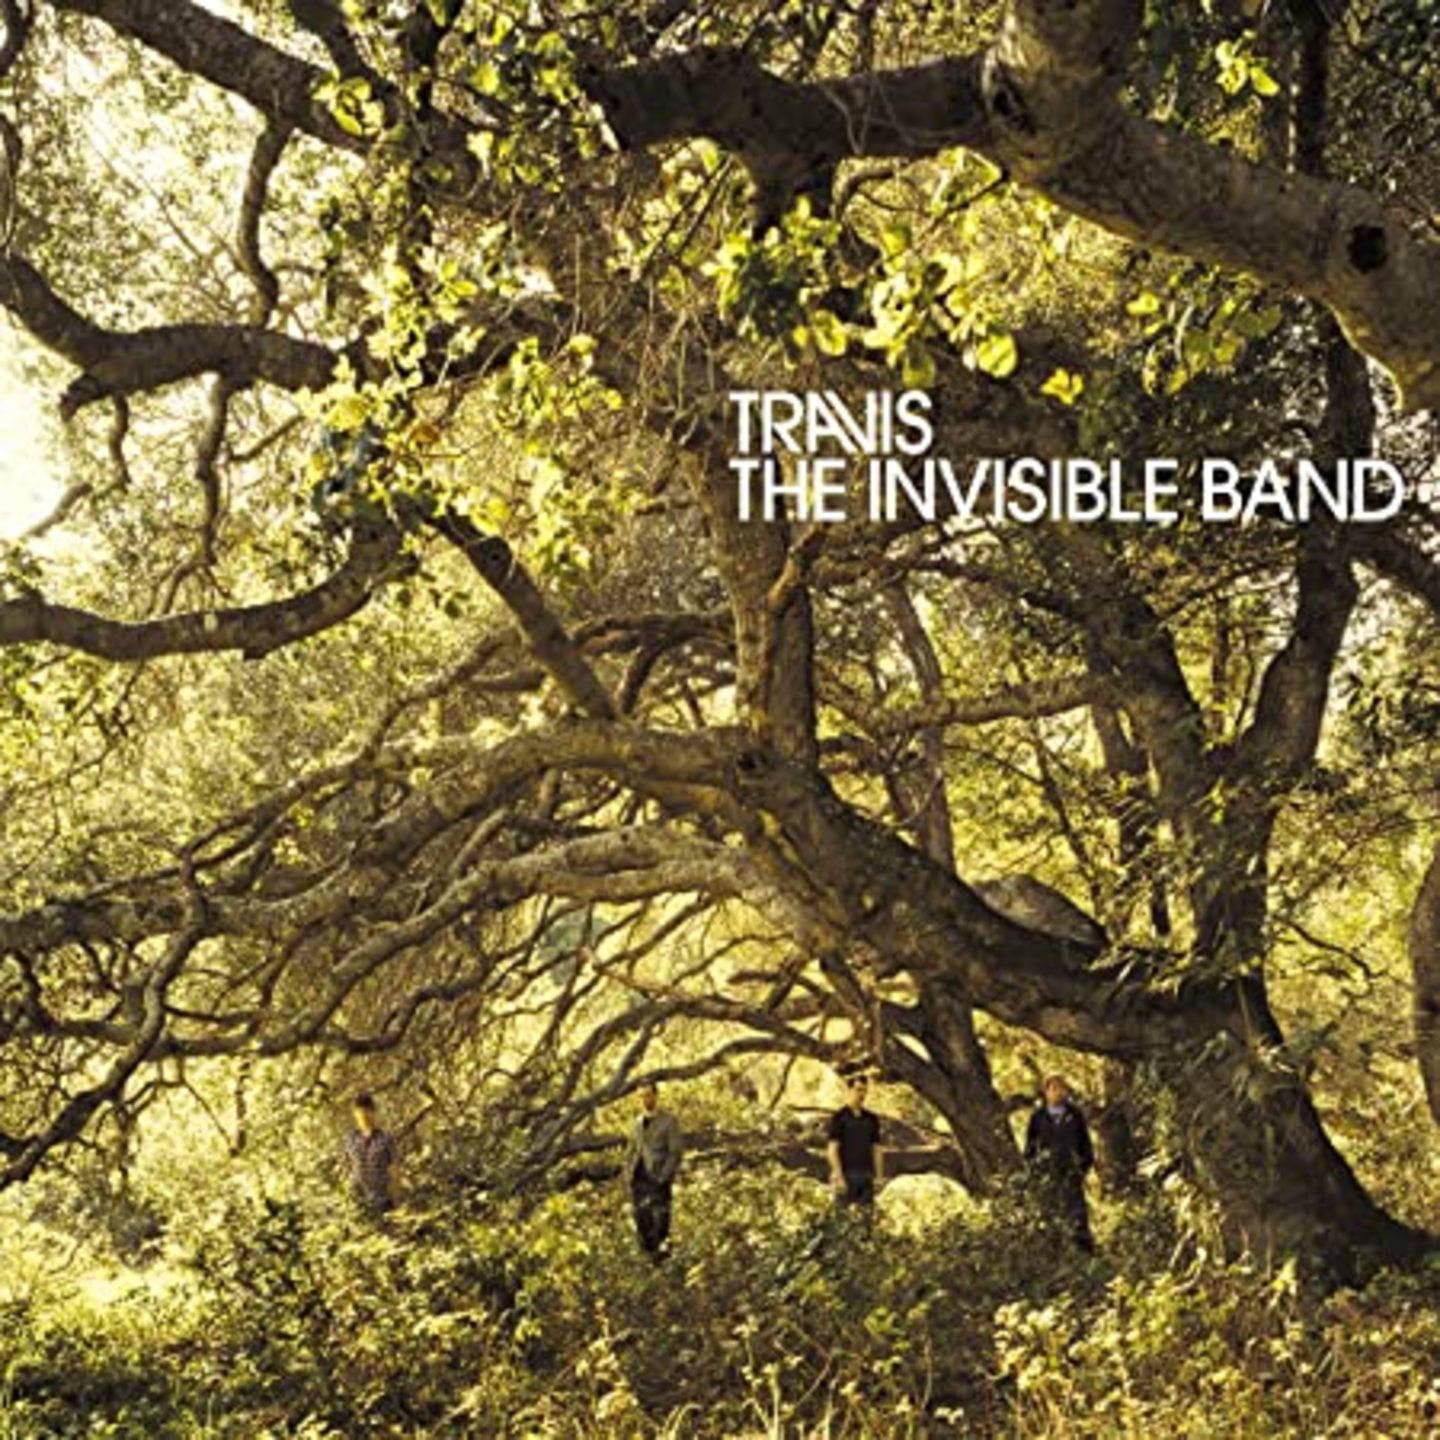 TRAVIS - The Invisible Band 20th Anniversary Edition LP